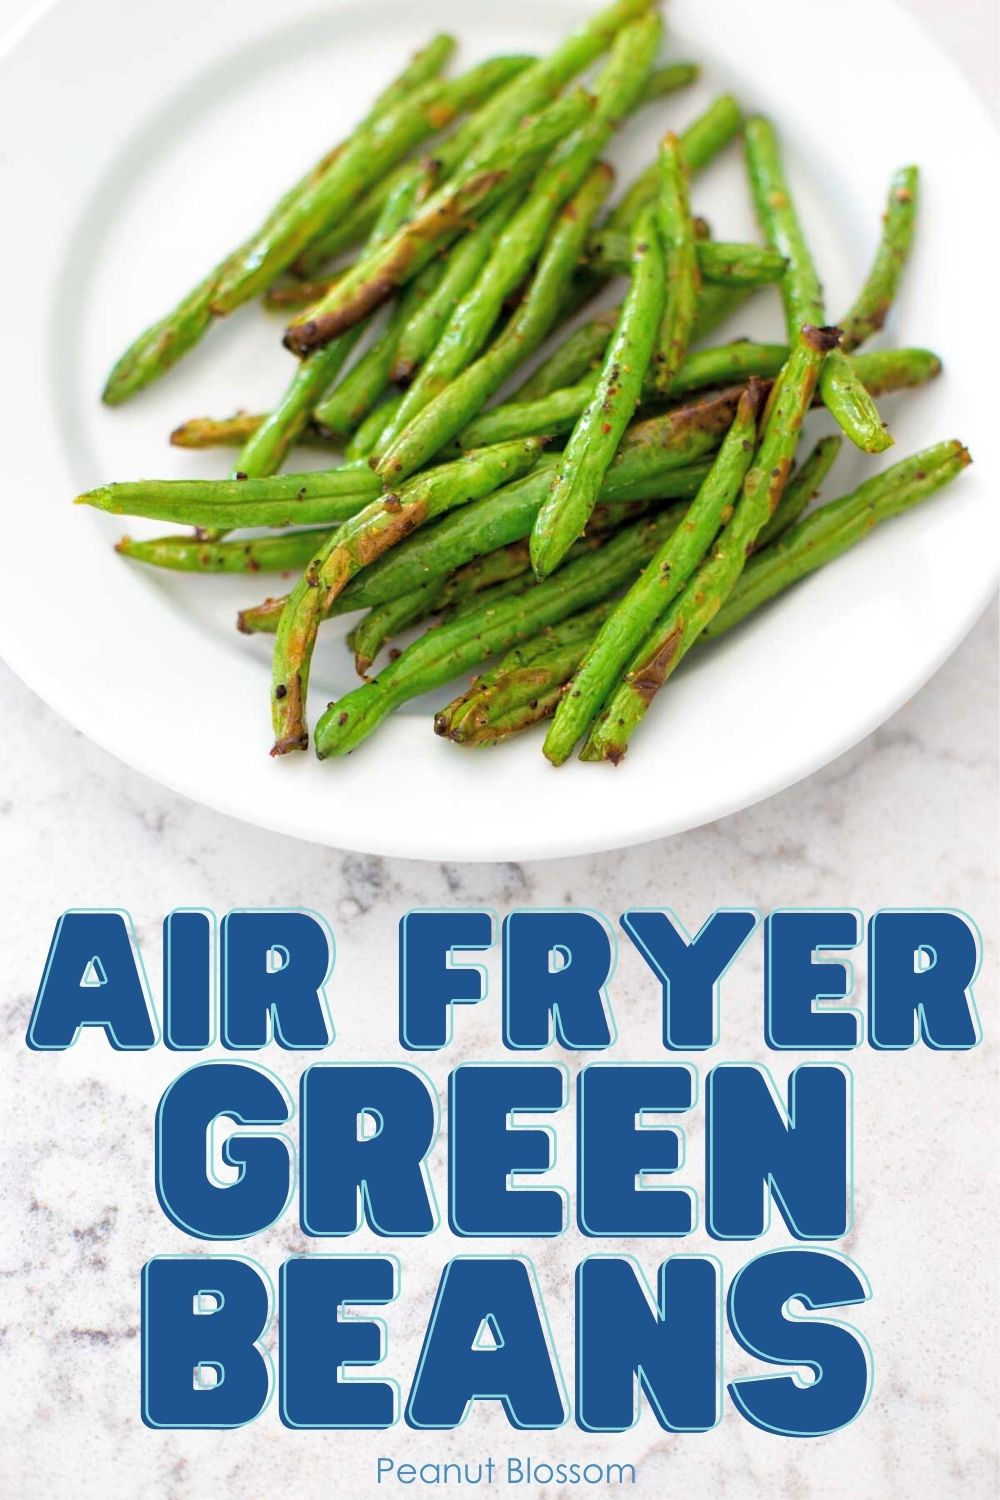 A plate of air fryer green beans that have been cooked.